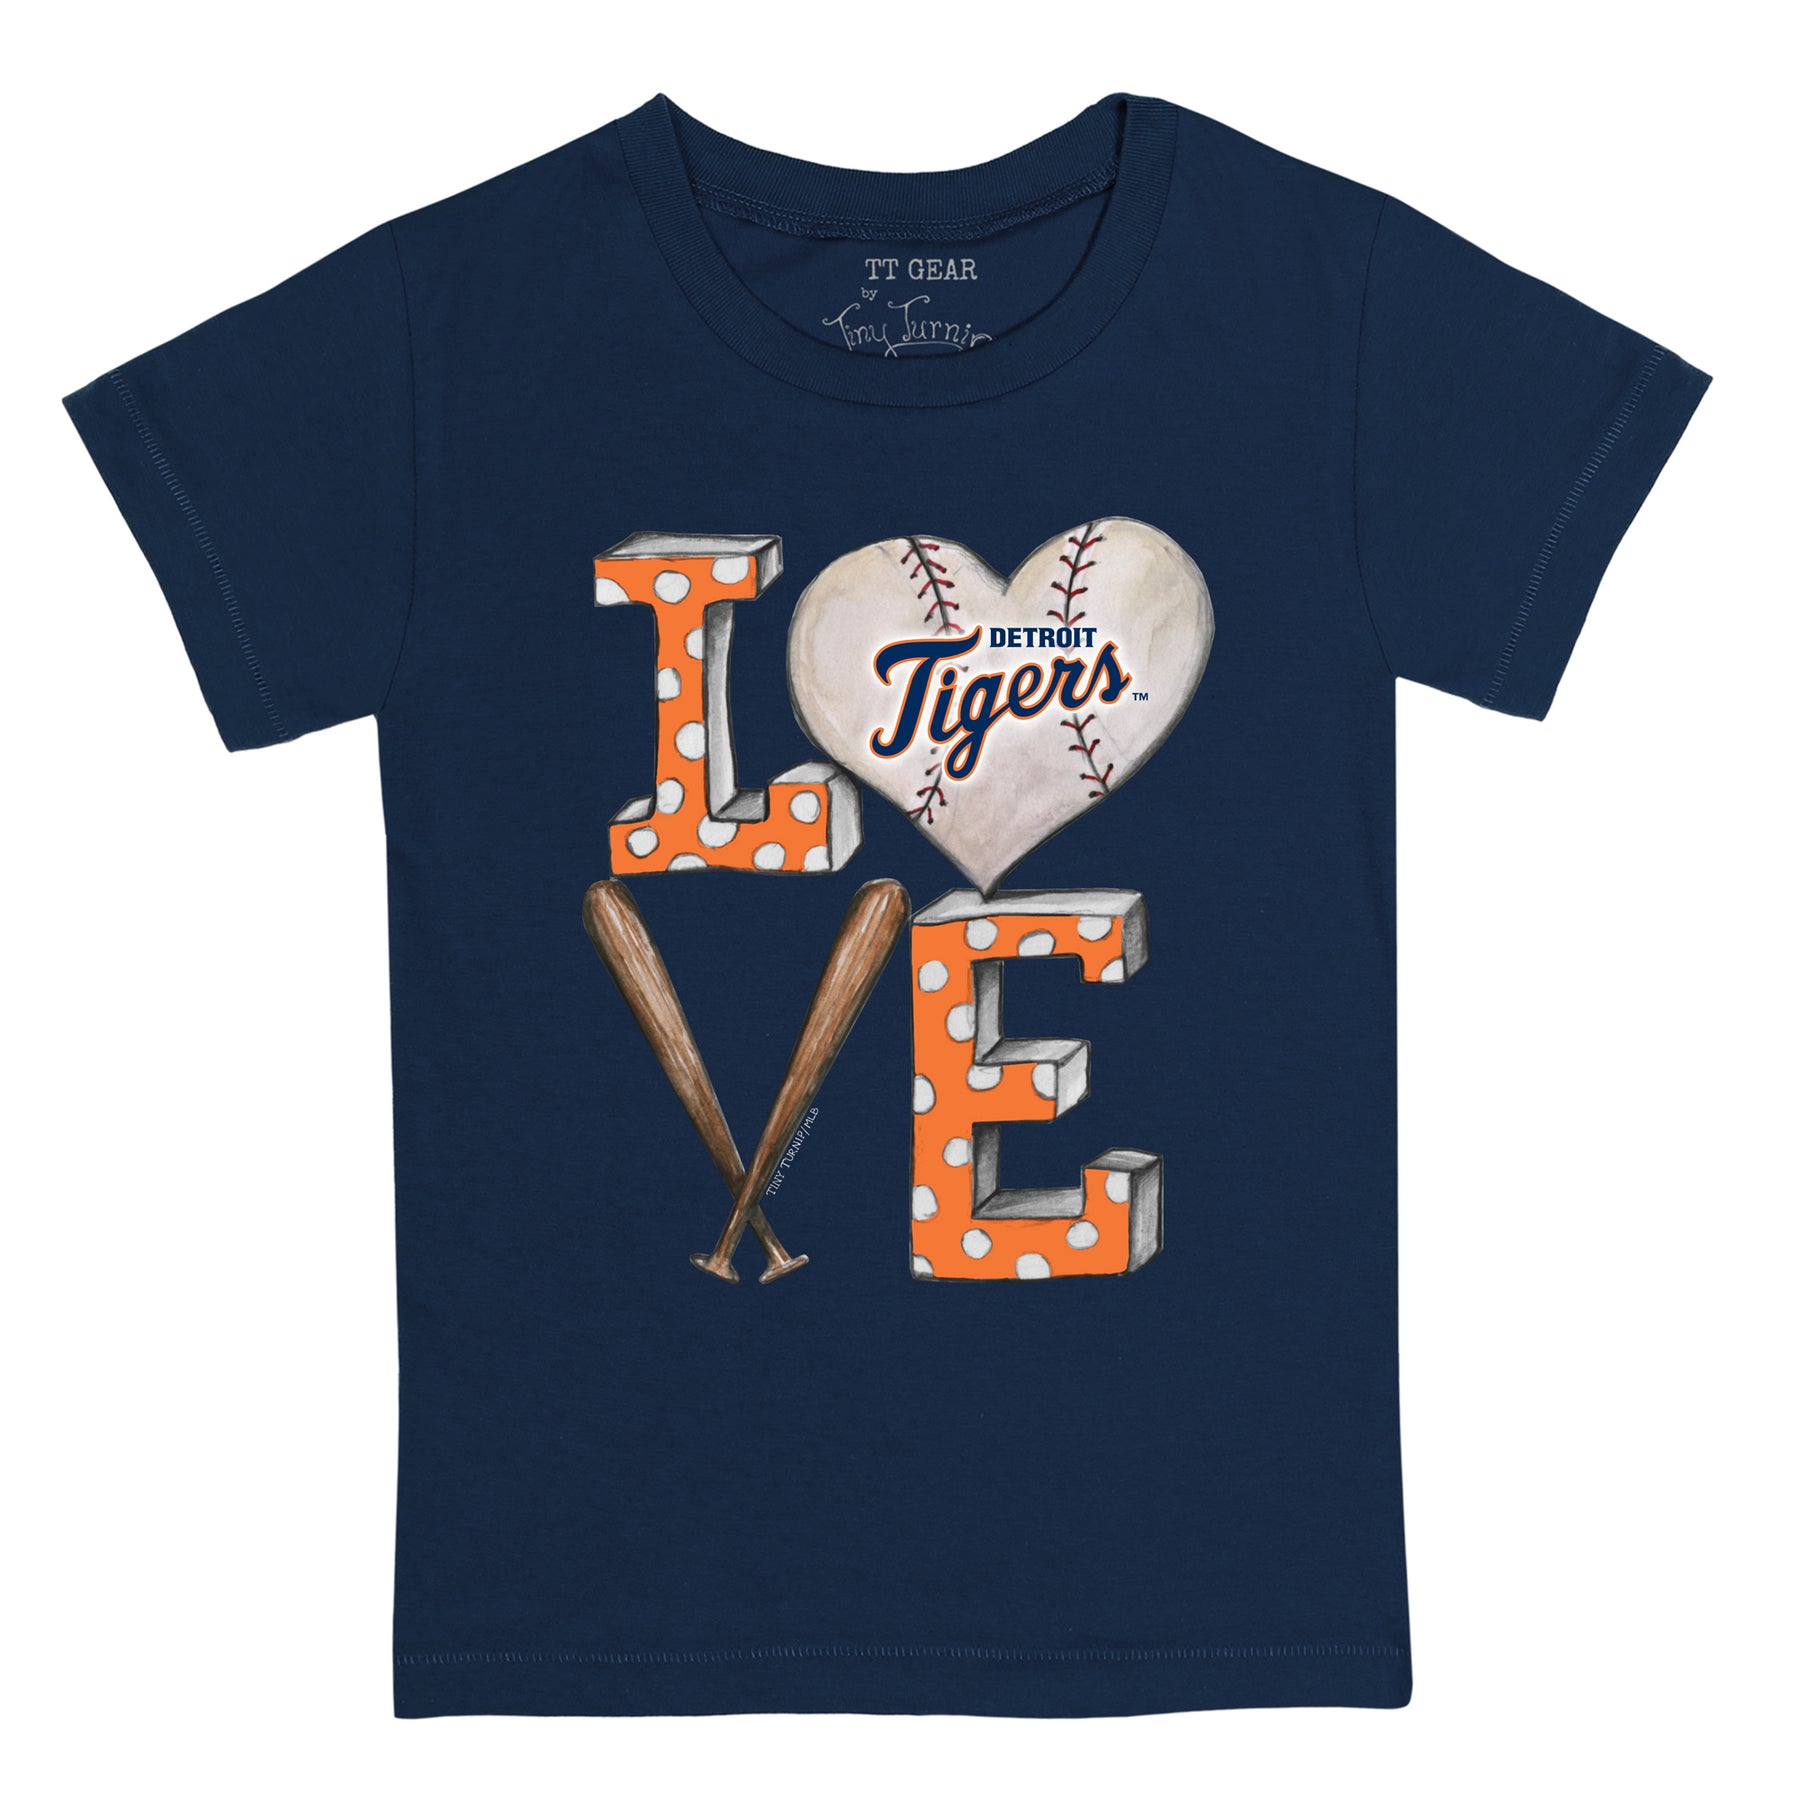 Cheap Detroit Tigers Apparel, Discount Tigers Gear, MLB Tigers Merchandise  On Sale